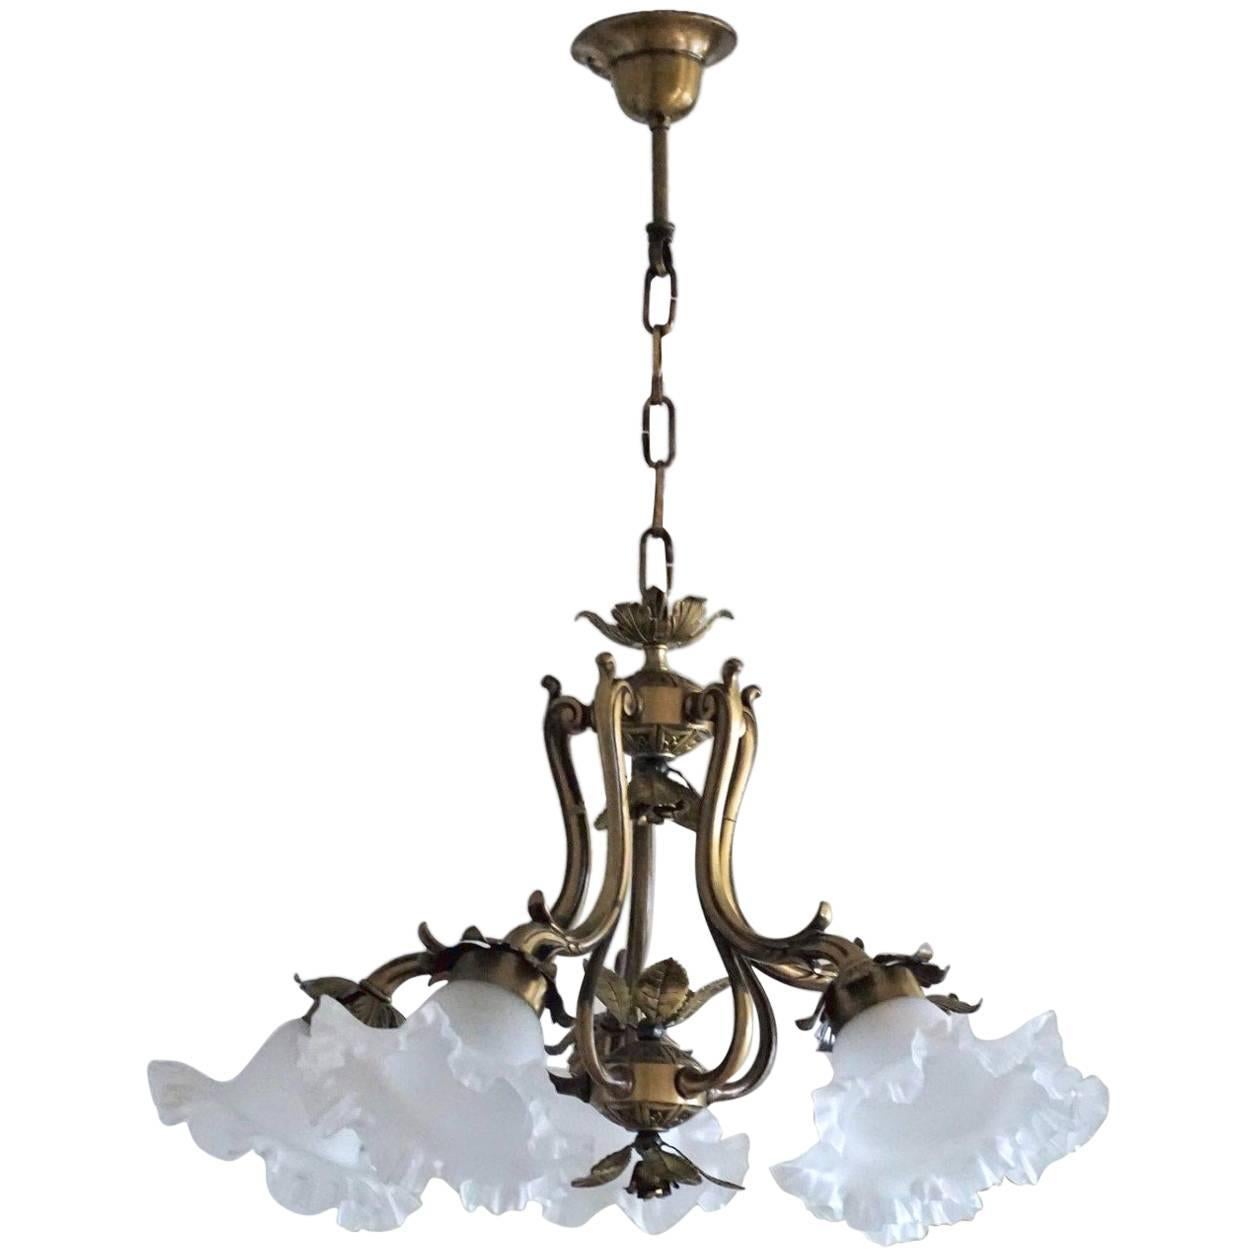 Midcentury Brass Five-Light Chandelier with Frosted Glass Shades